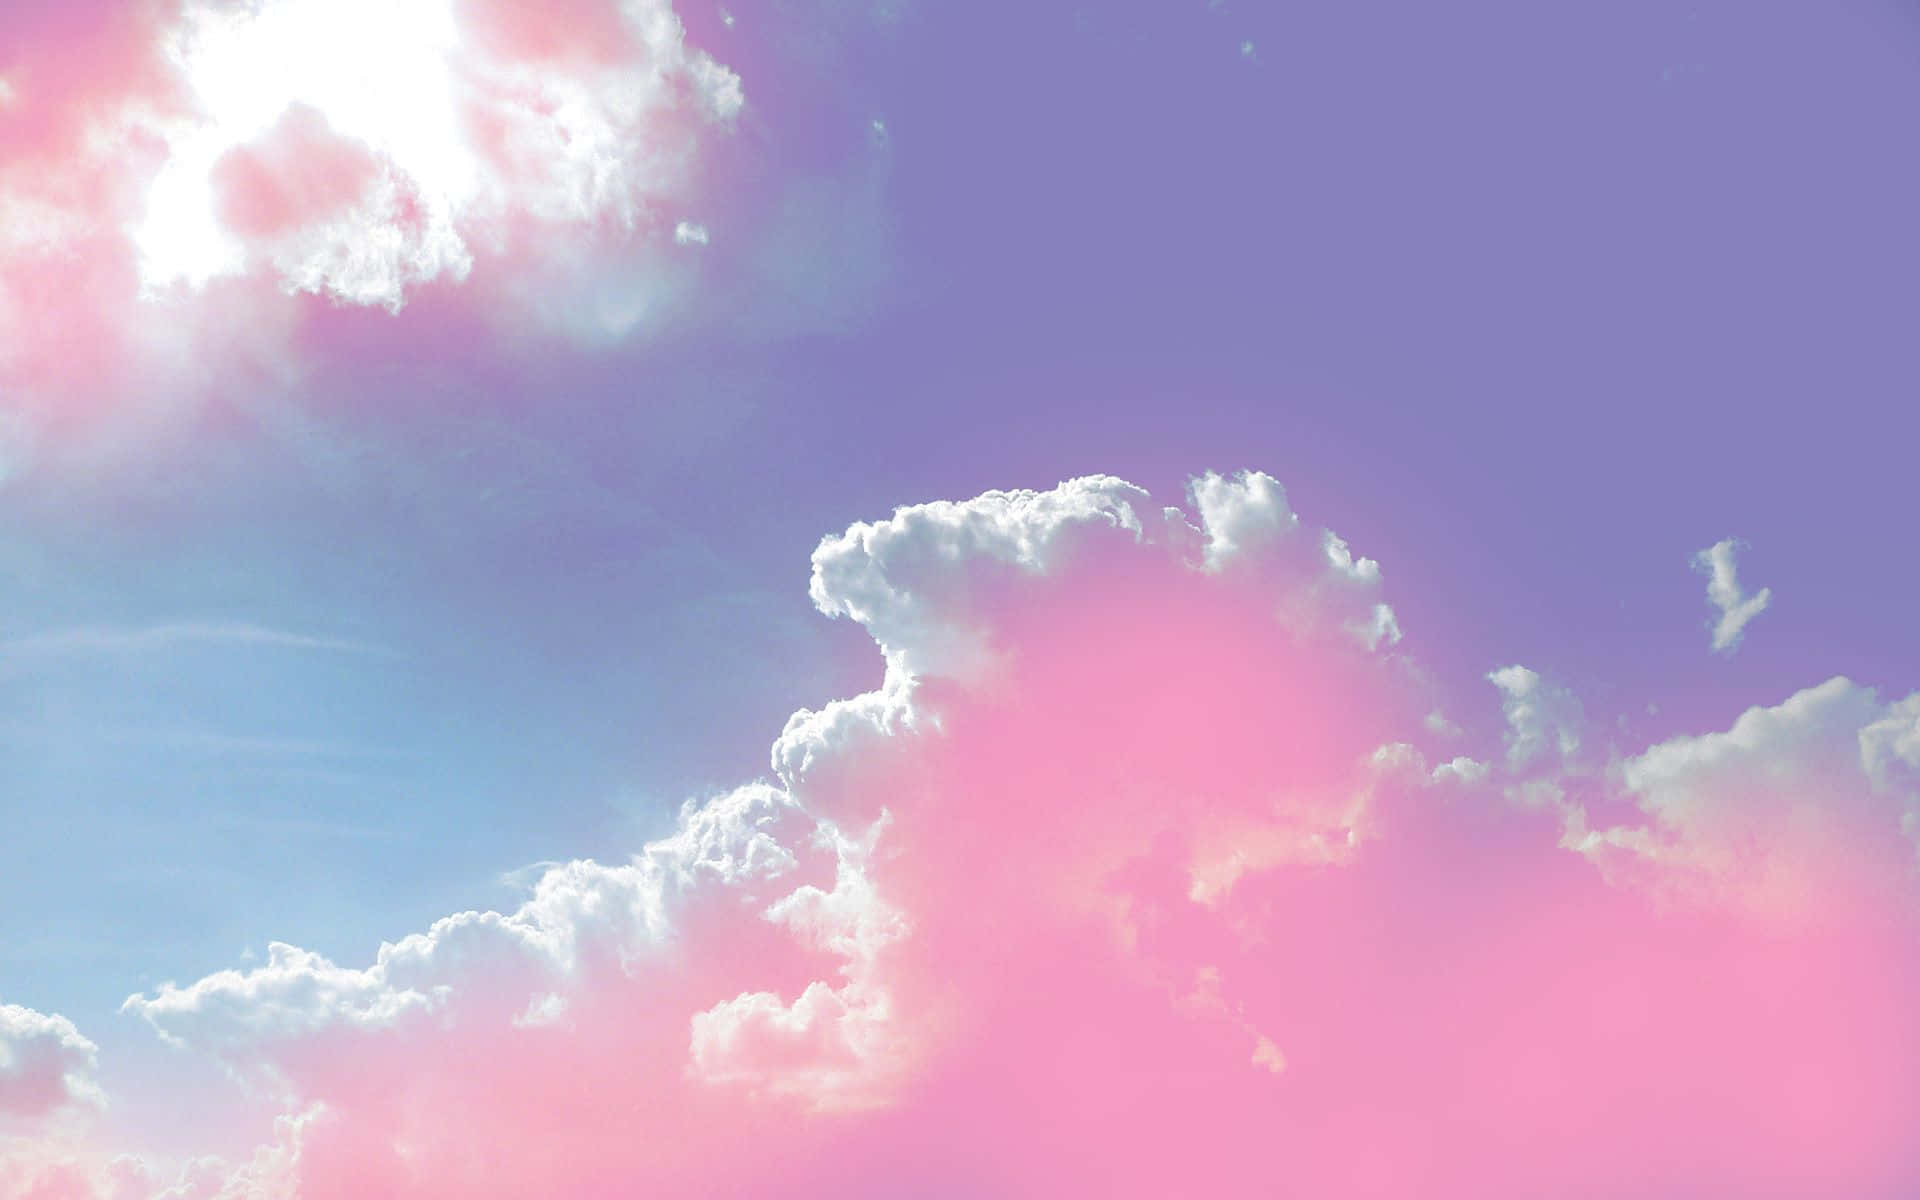 Sky With Glowing Pink Clouds Background